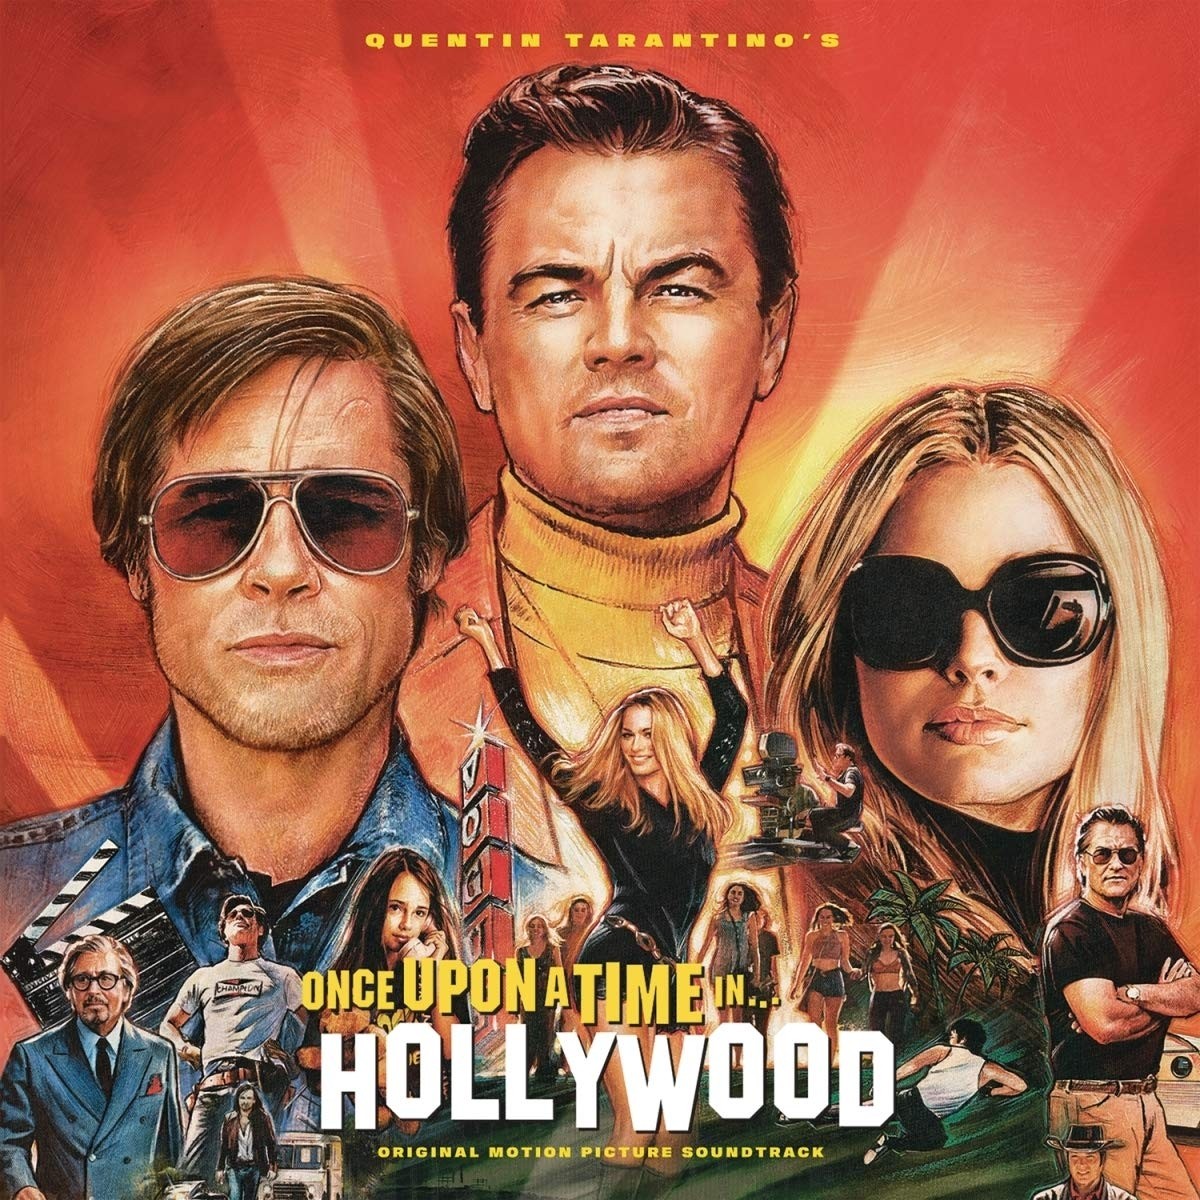 VA - Quentin Tarantino's Once Upon Time Hollywood Original Soundtrack 2XLP (Colored)